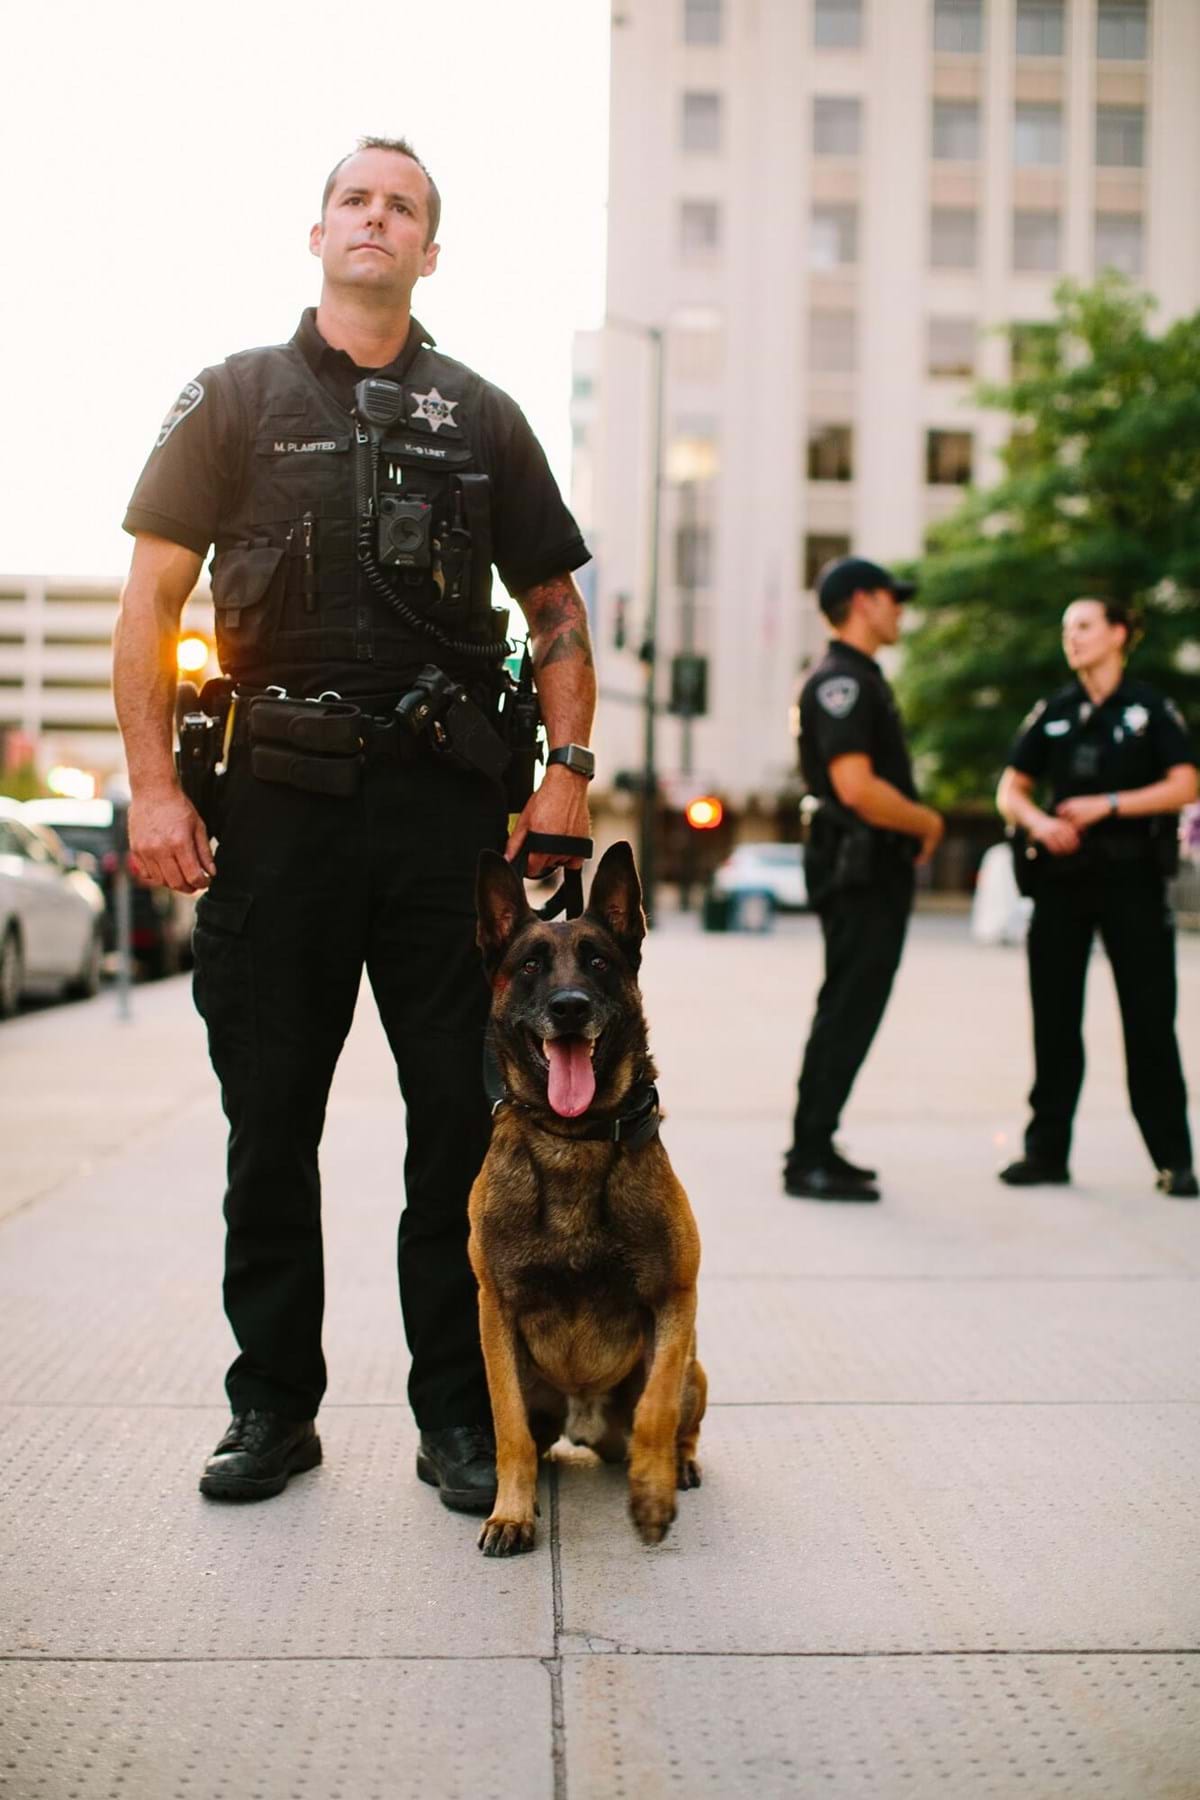 Officer with K9 unit